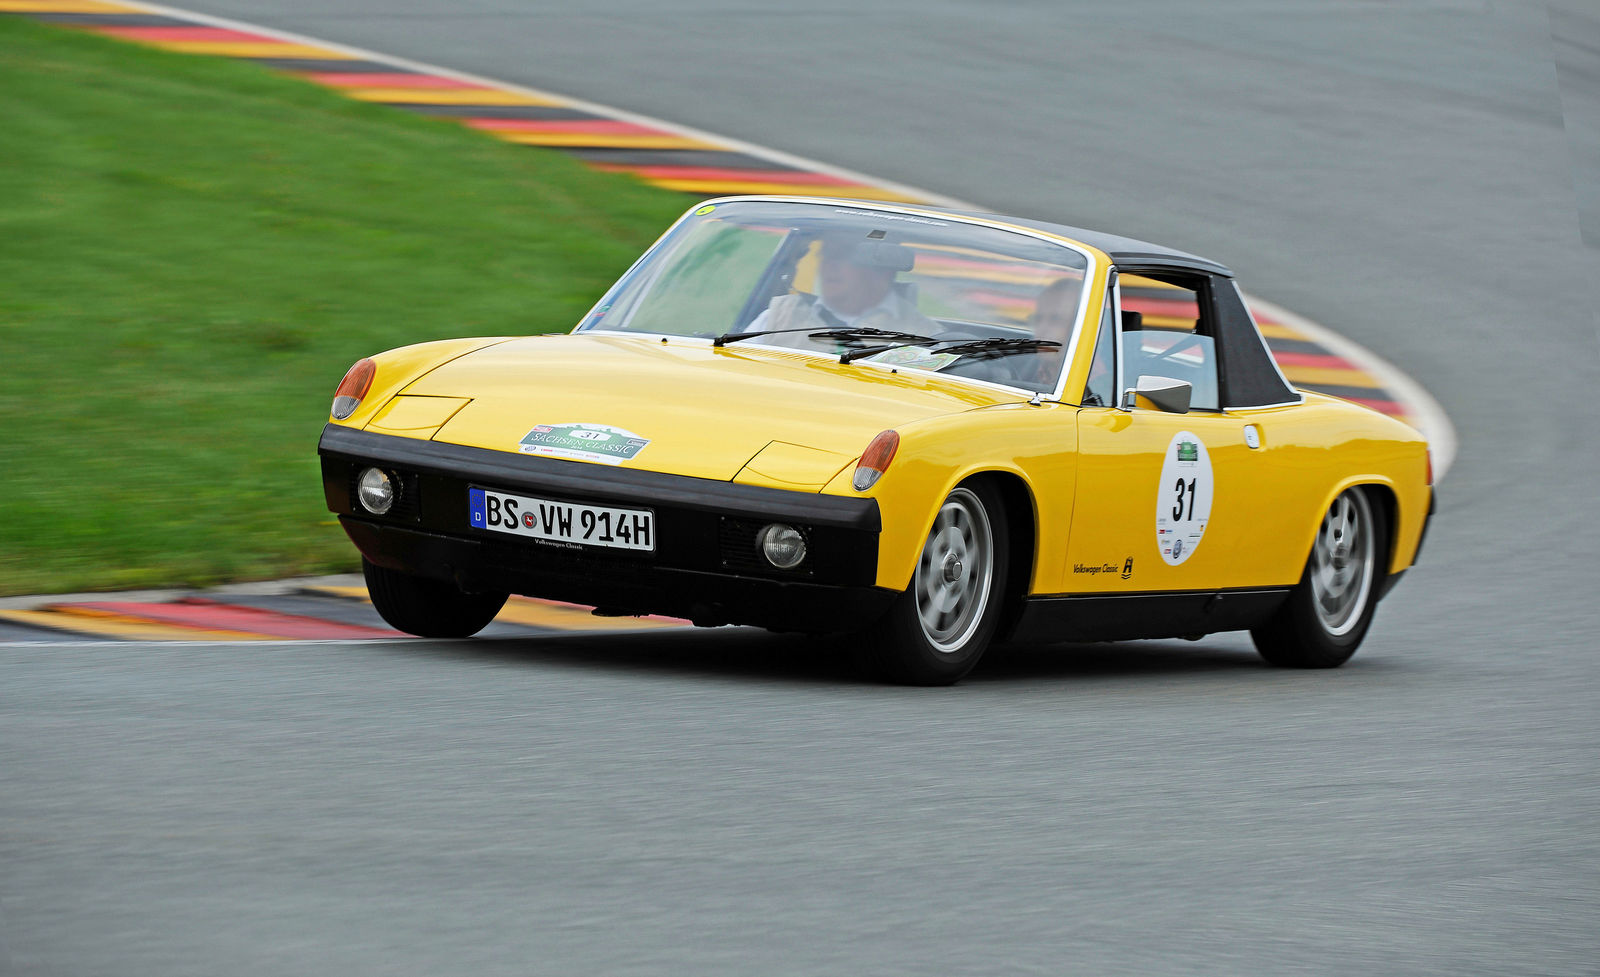 VW-Porsche 914/4 (1974): The first production mid-engined sports car from Germany celebrates its 50th anniversary in 2019.